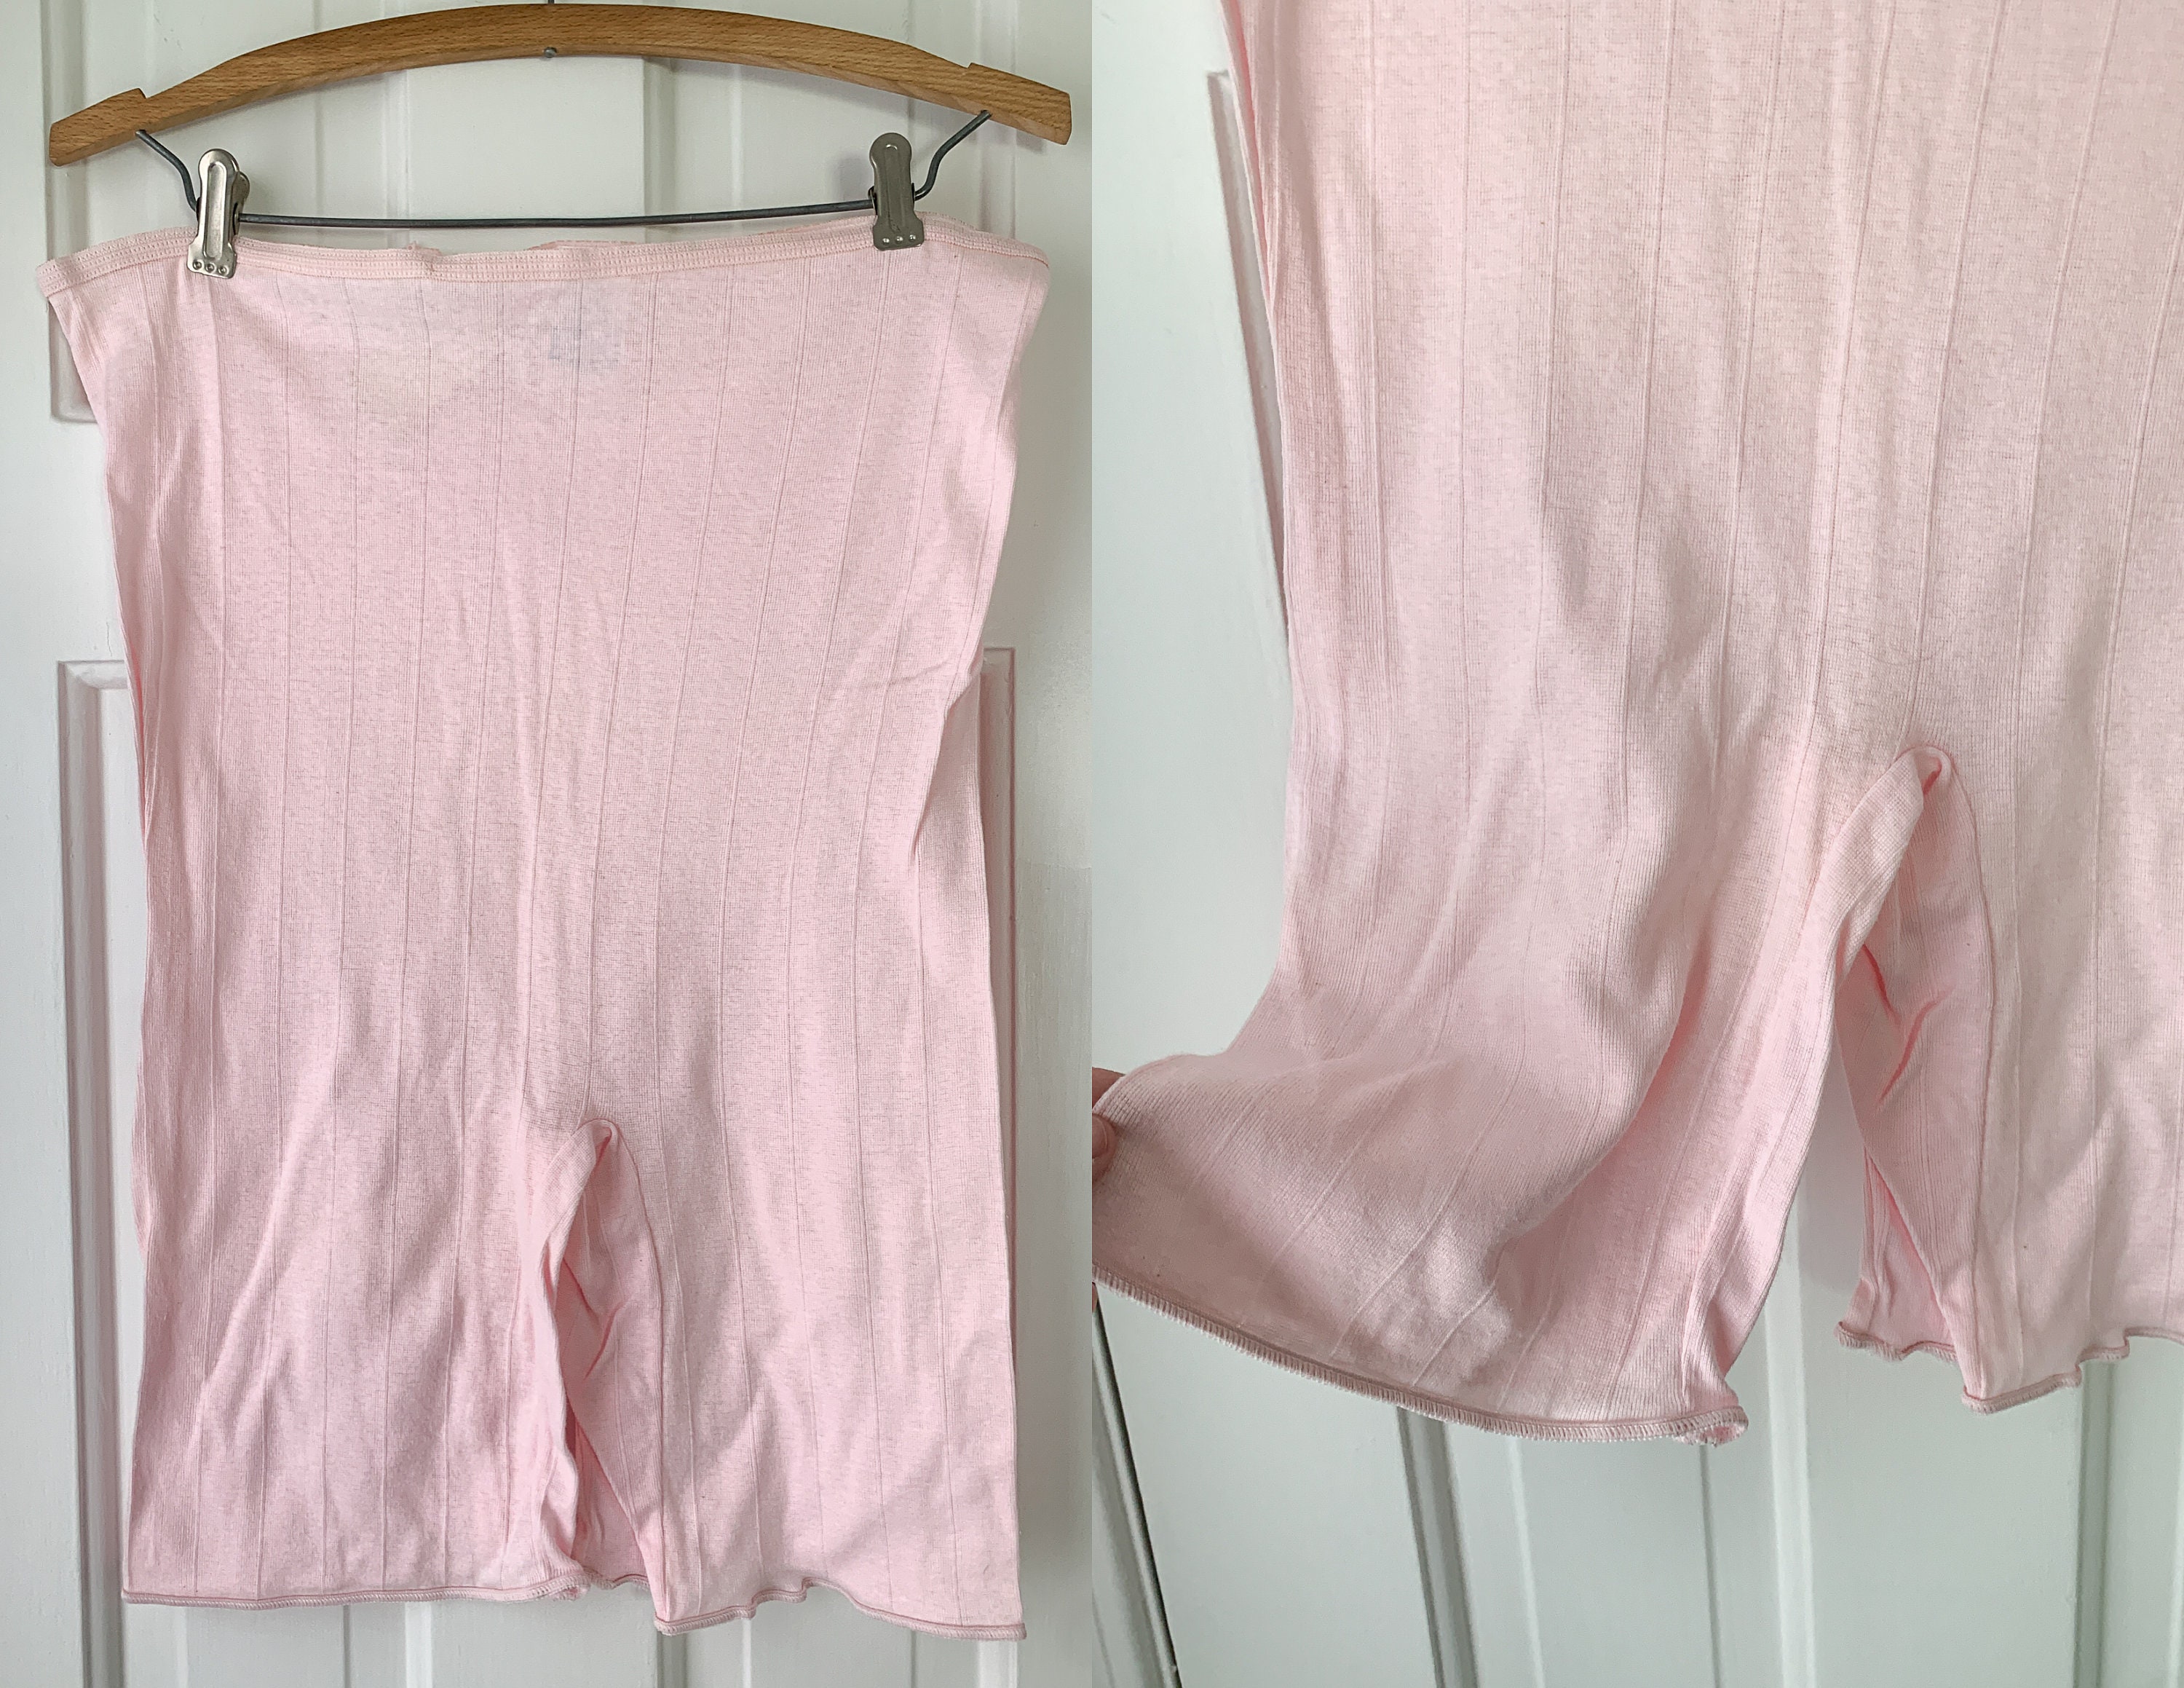 Vintage pink t-shirt material bloomers, knickers, panties, made by ...